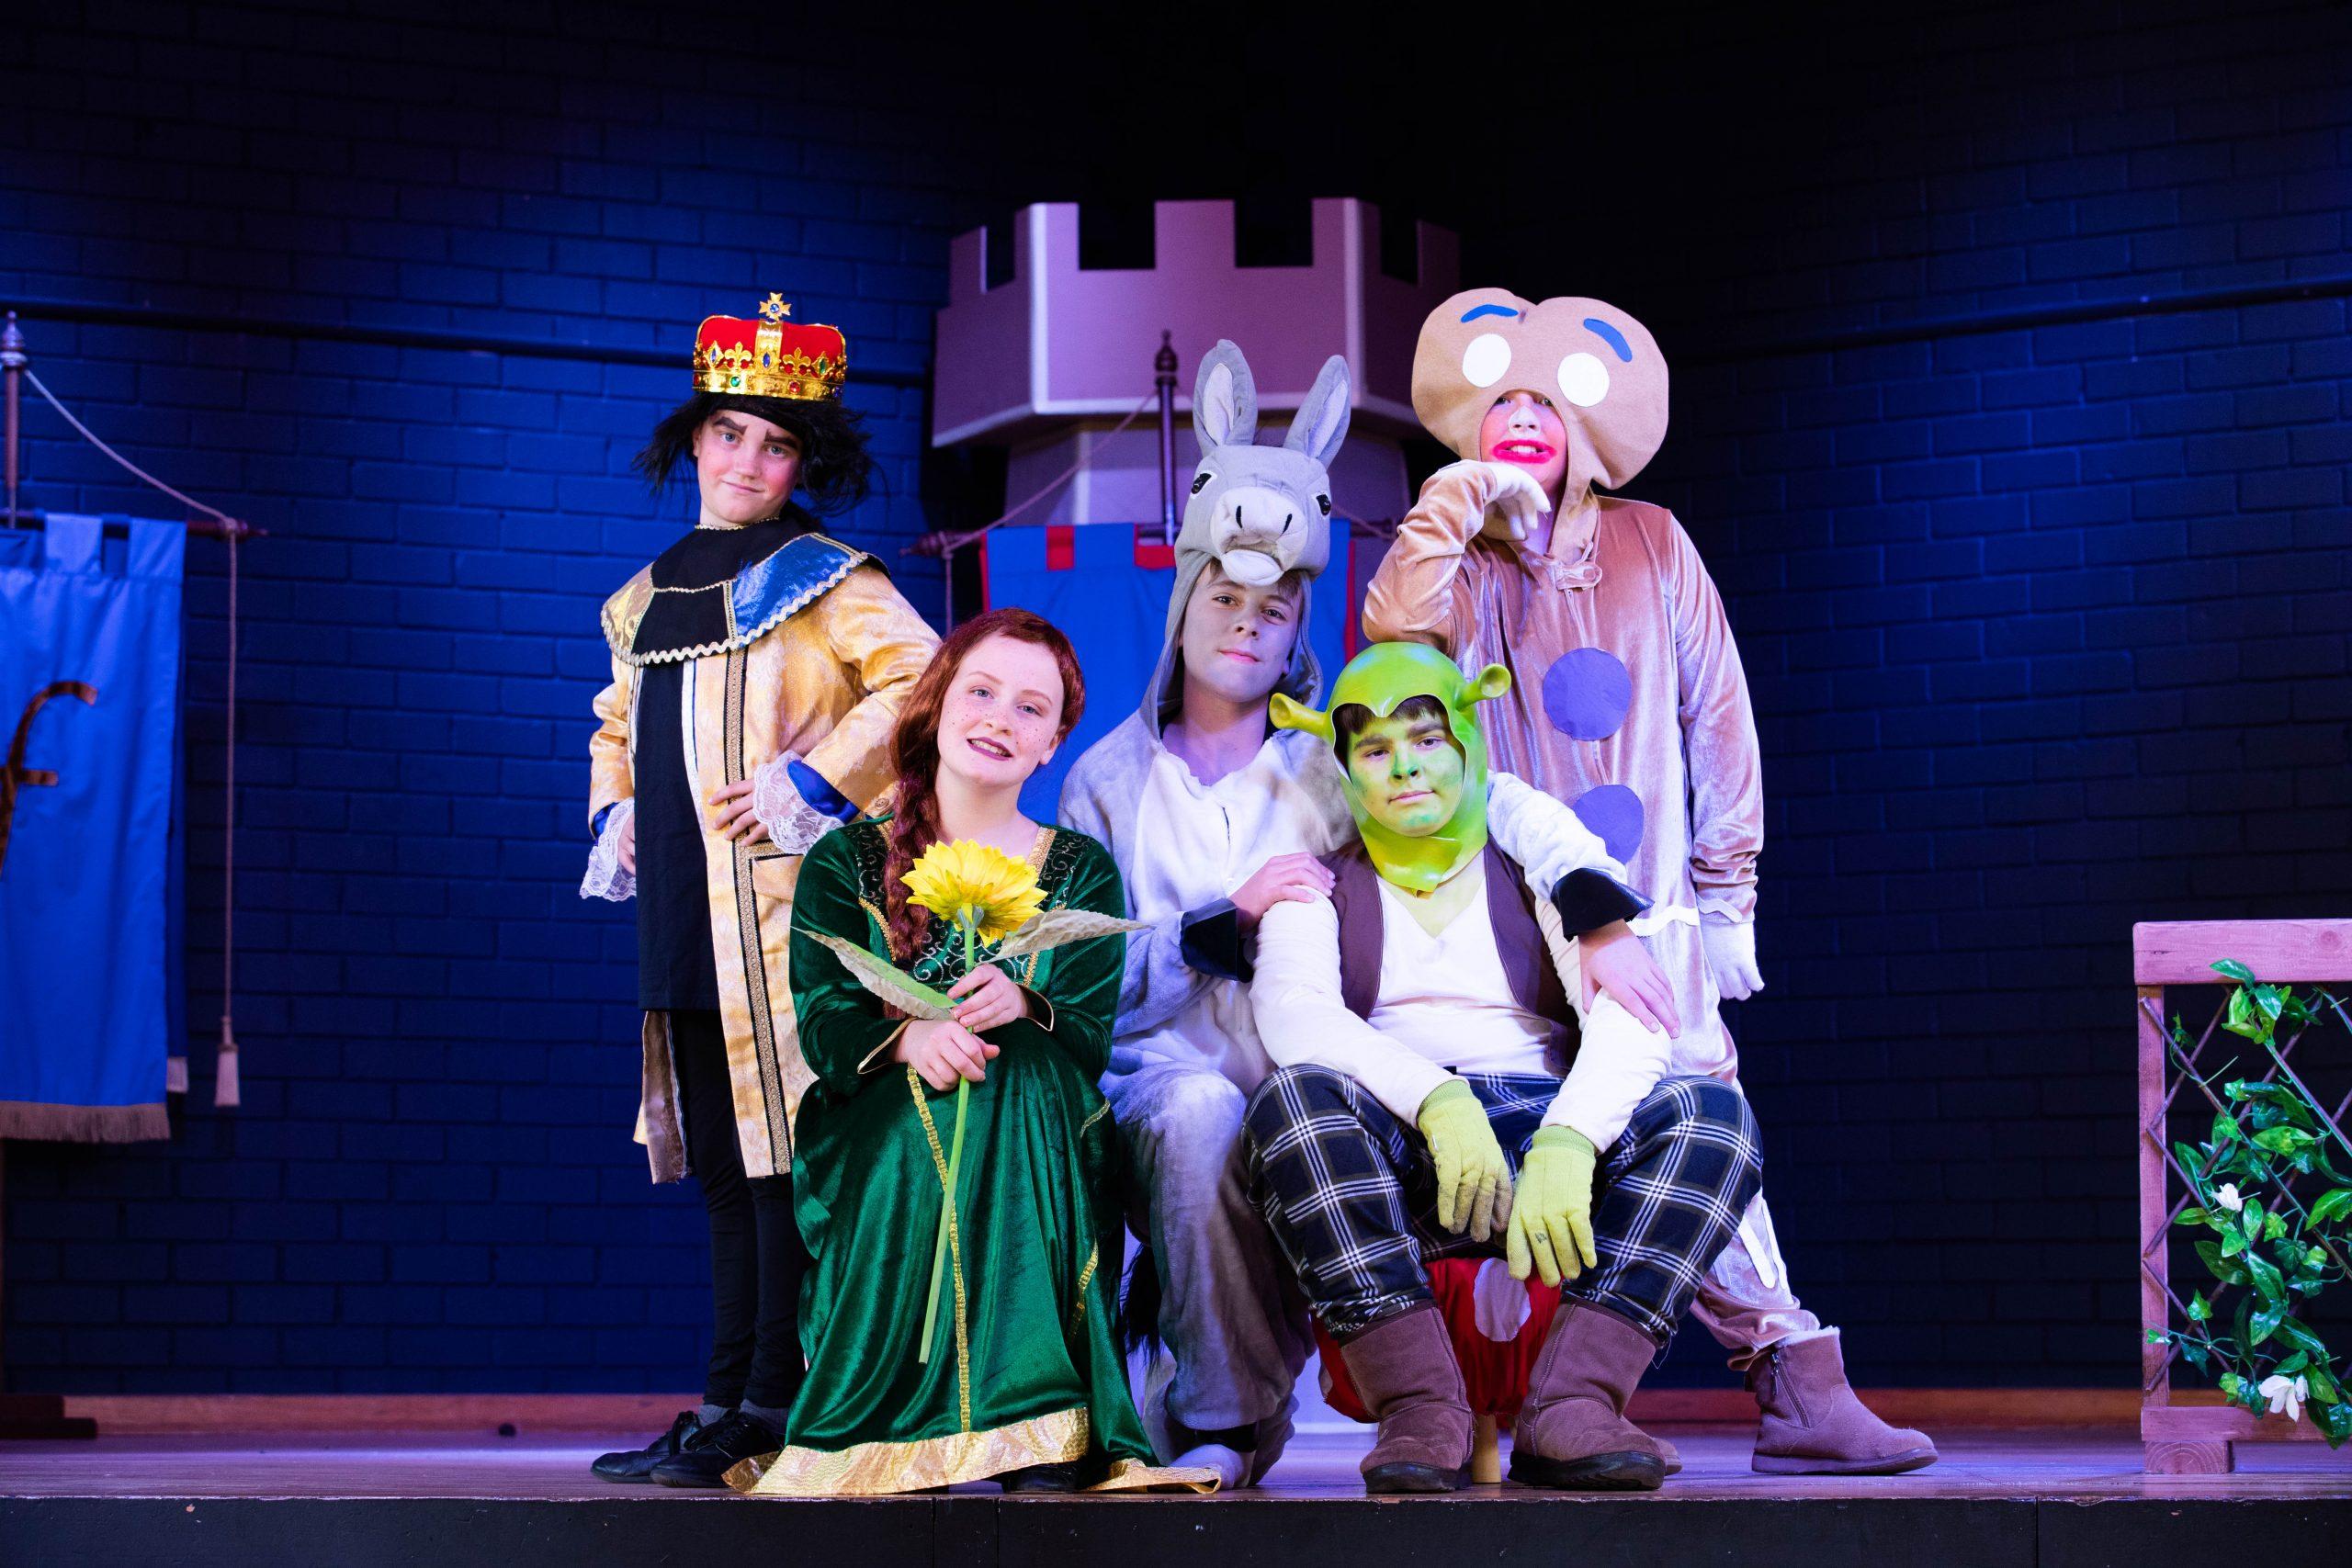 Gippsland Grammar students Matthew Canfield as Lord Farquaad, Hannah Mack as Princess Fiona, Oscar Callanan as Donkey, Ashton Carroll as Shrek and Dillon Meredith as Gingy in ‘Shrek The Musical JR’ on show at The Wedge in late August.